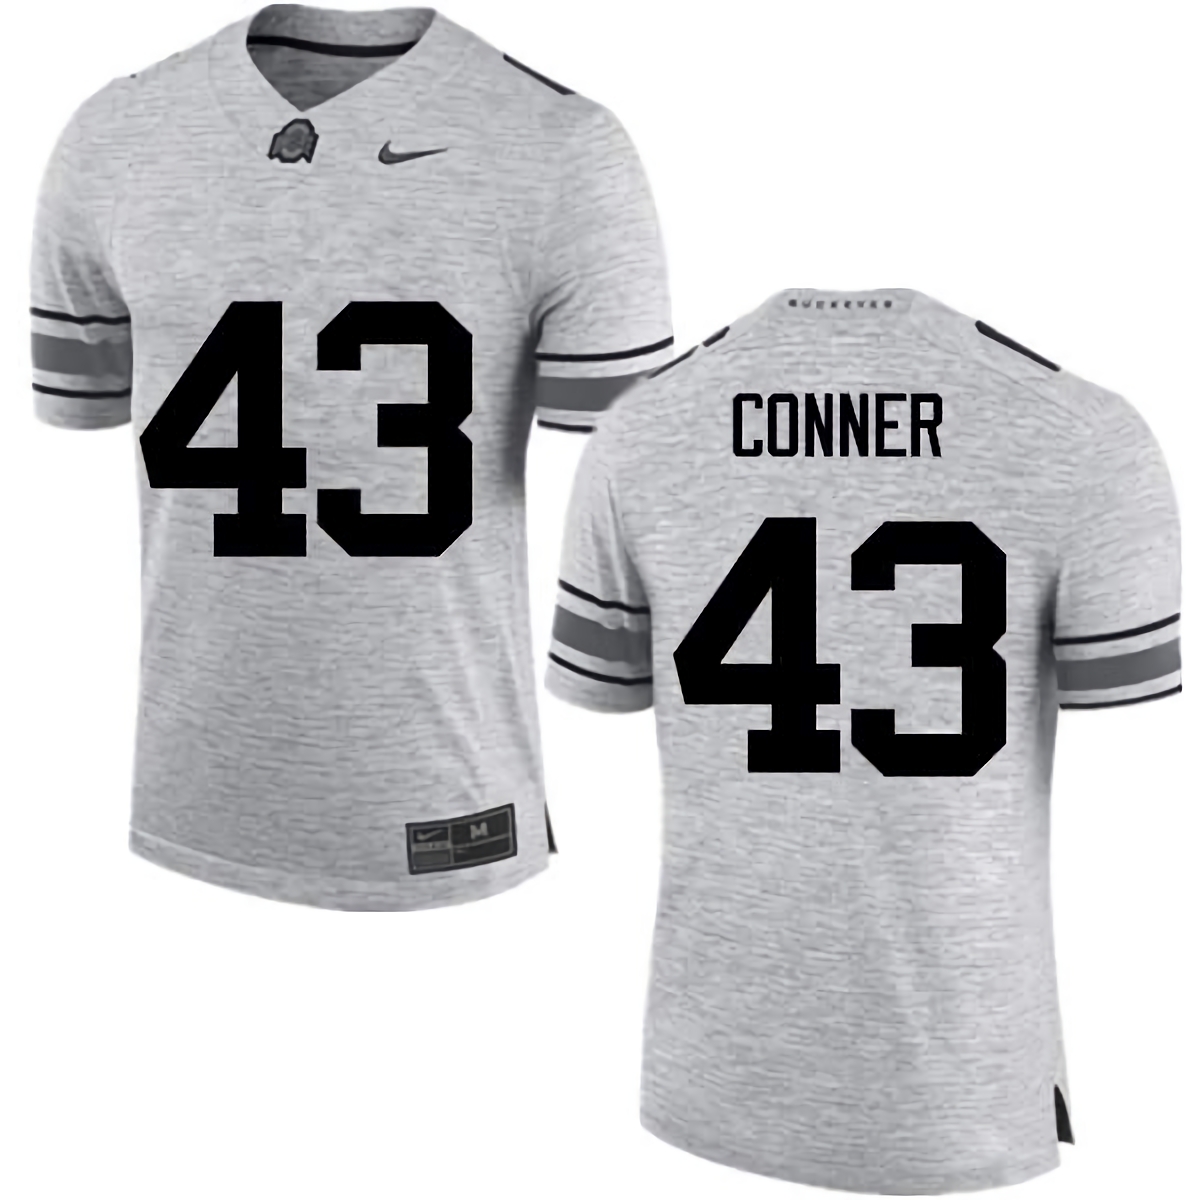 Nick Conner Ohio State Buckeyes Men's NCAA #43 Nike Gray College Stitched Football Jersey SIQ2756QZ